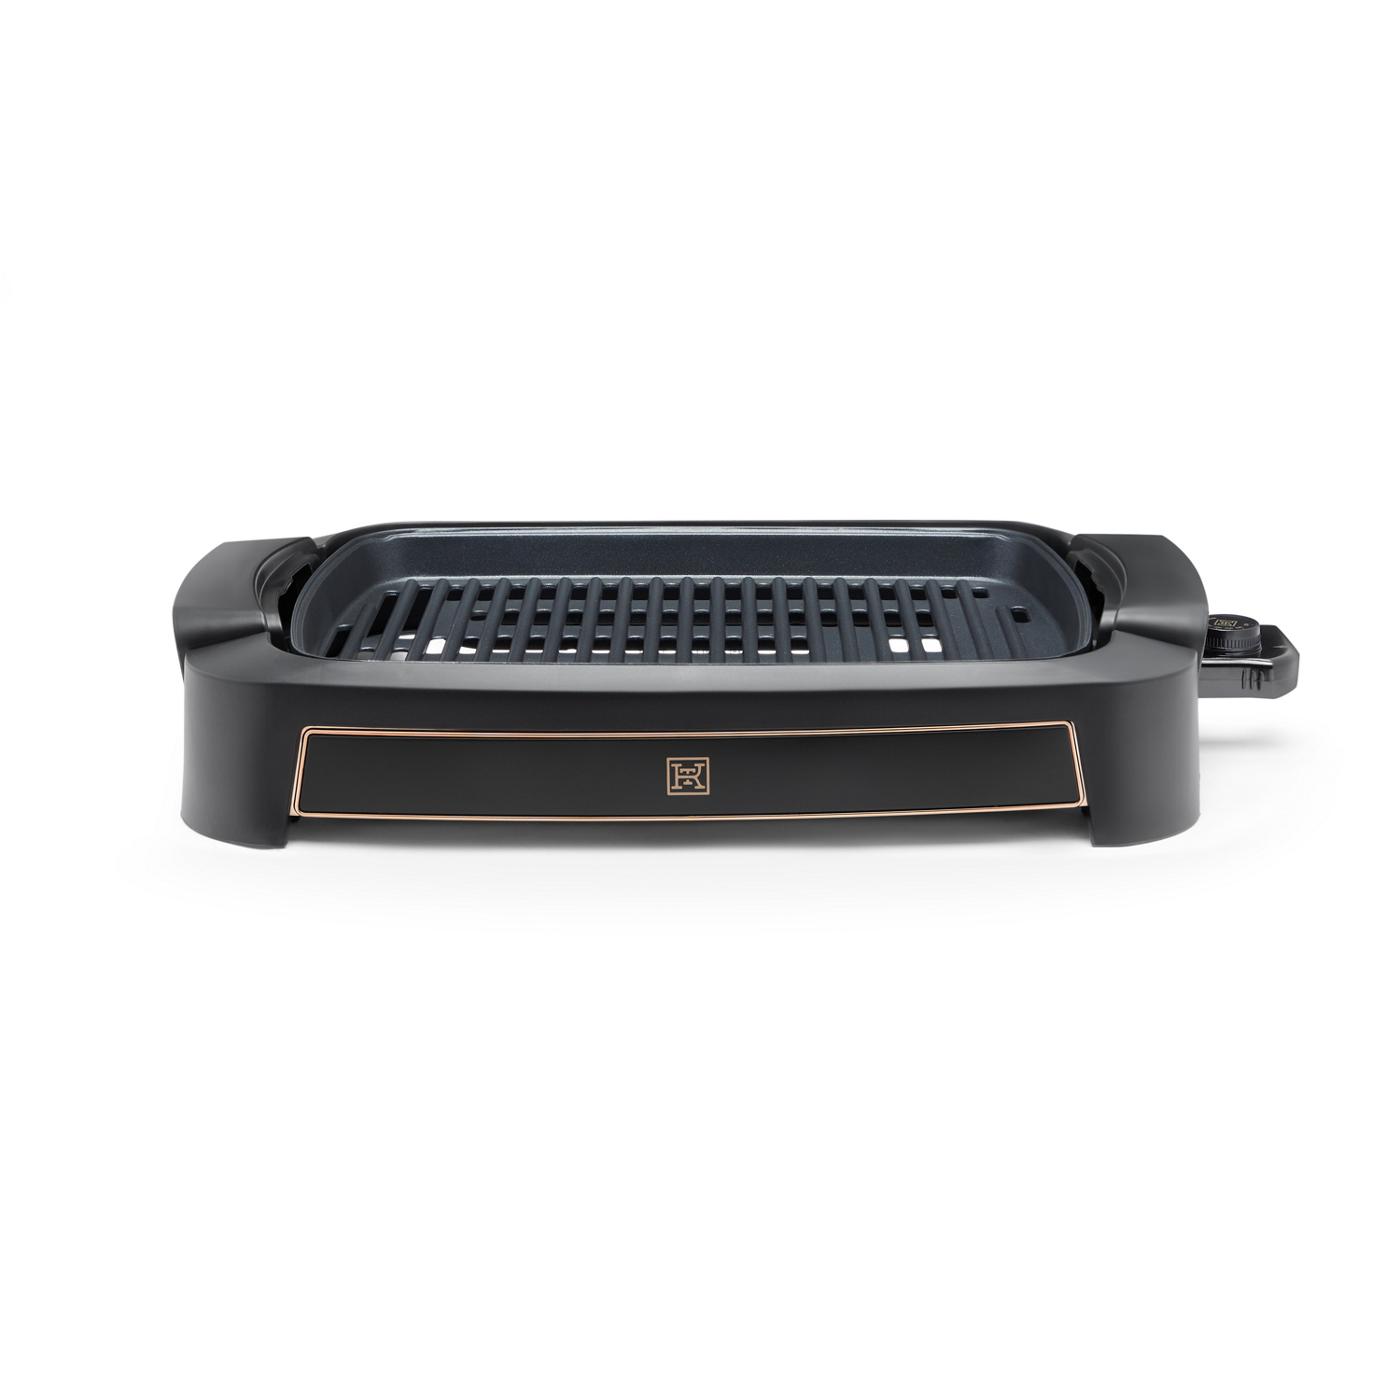 Kitchen & Table by H-E-B Smokeless Grill - Classic Black; image 1 of 6